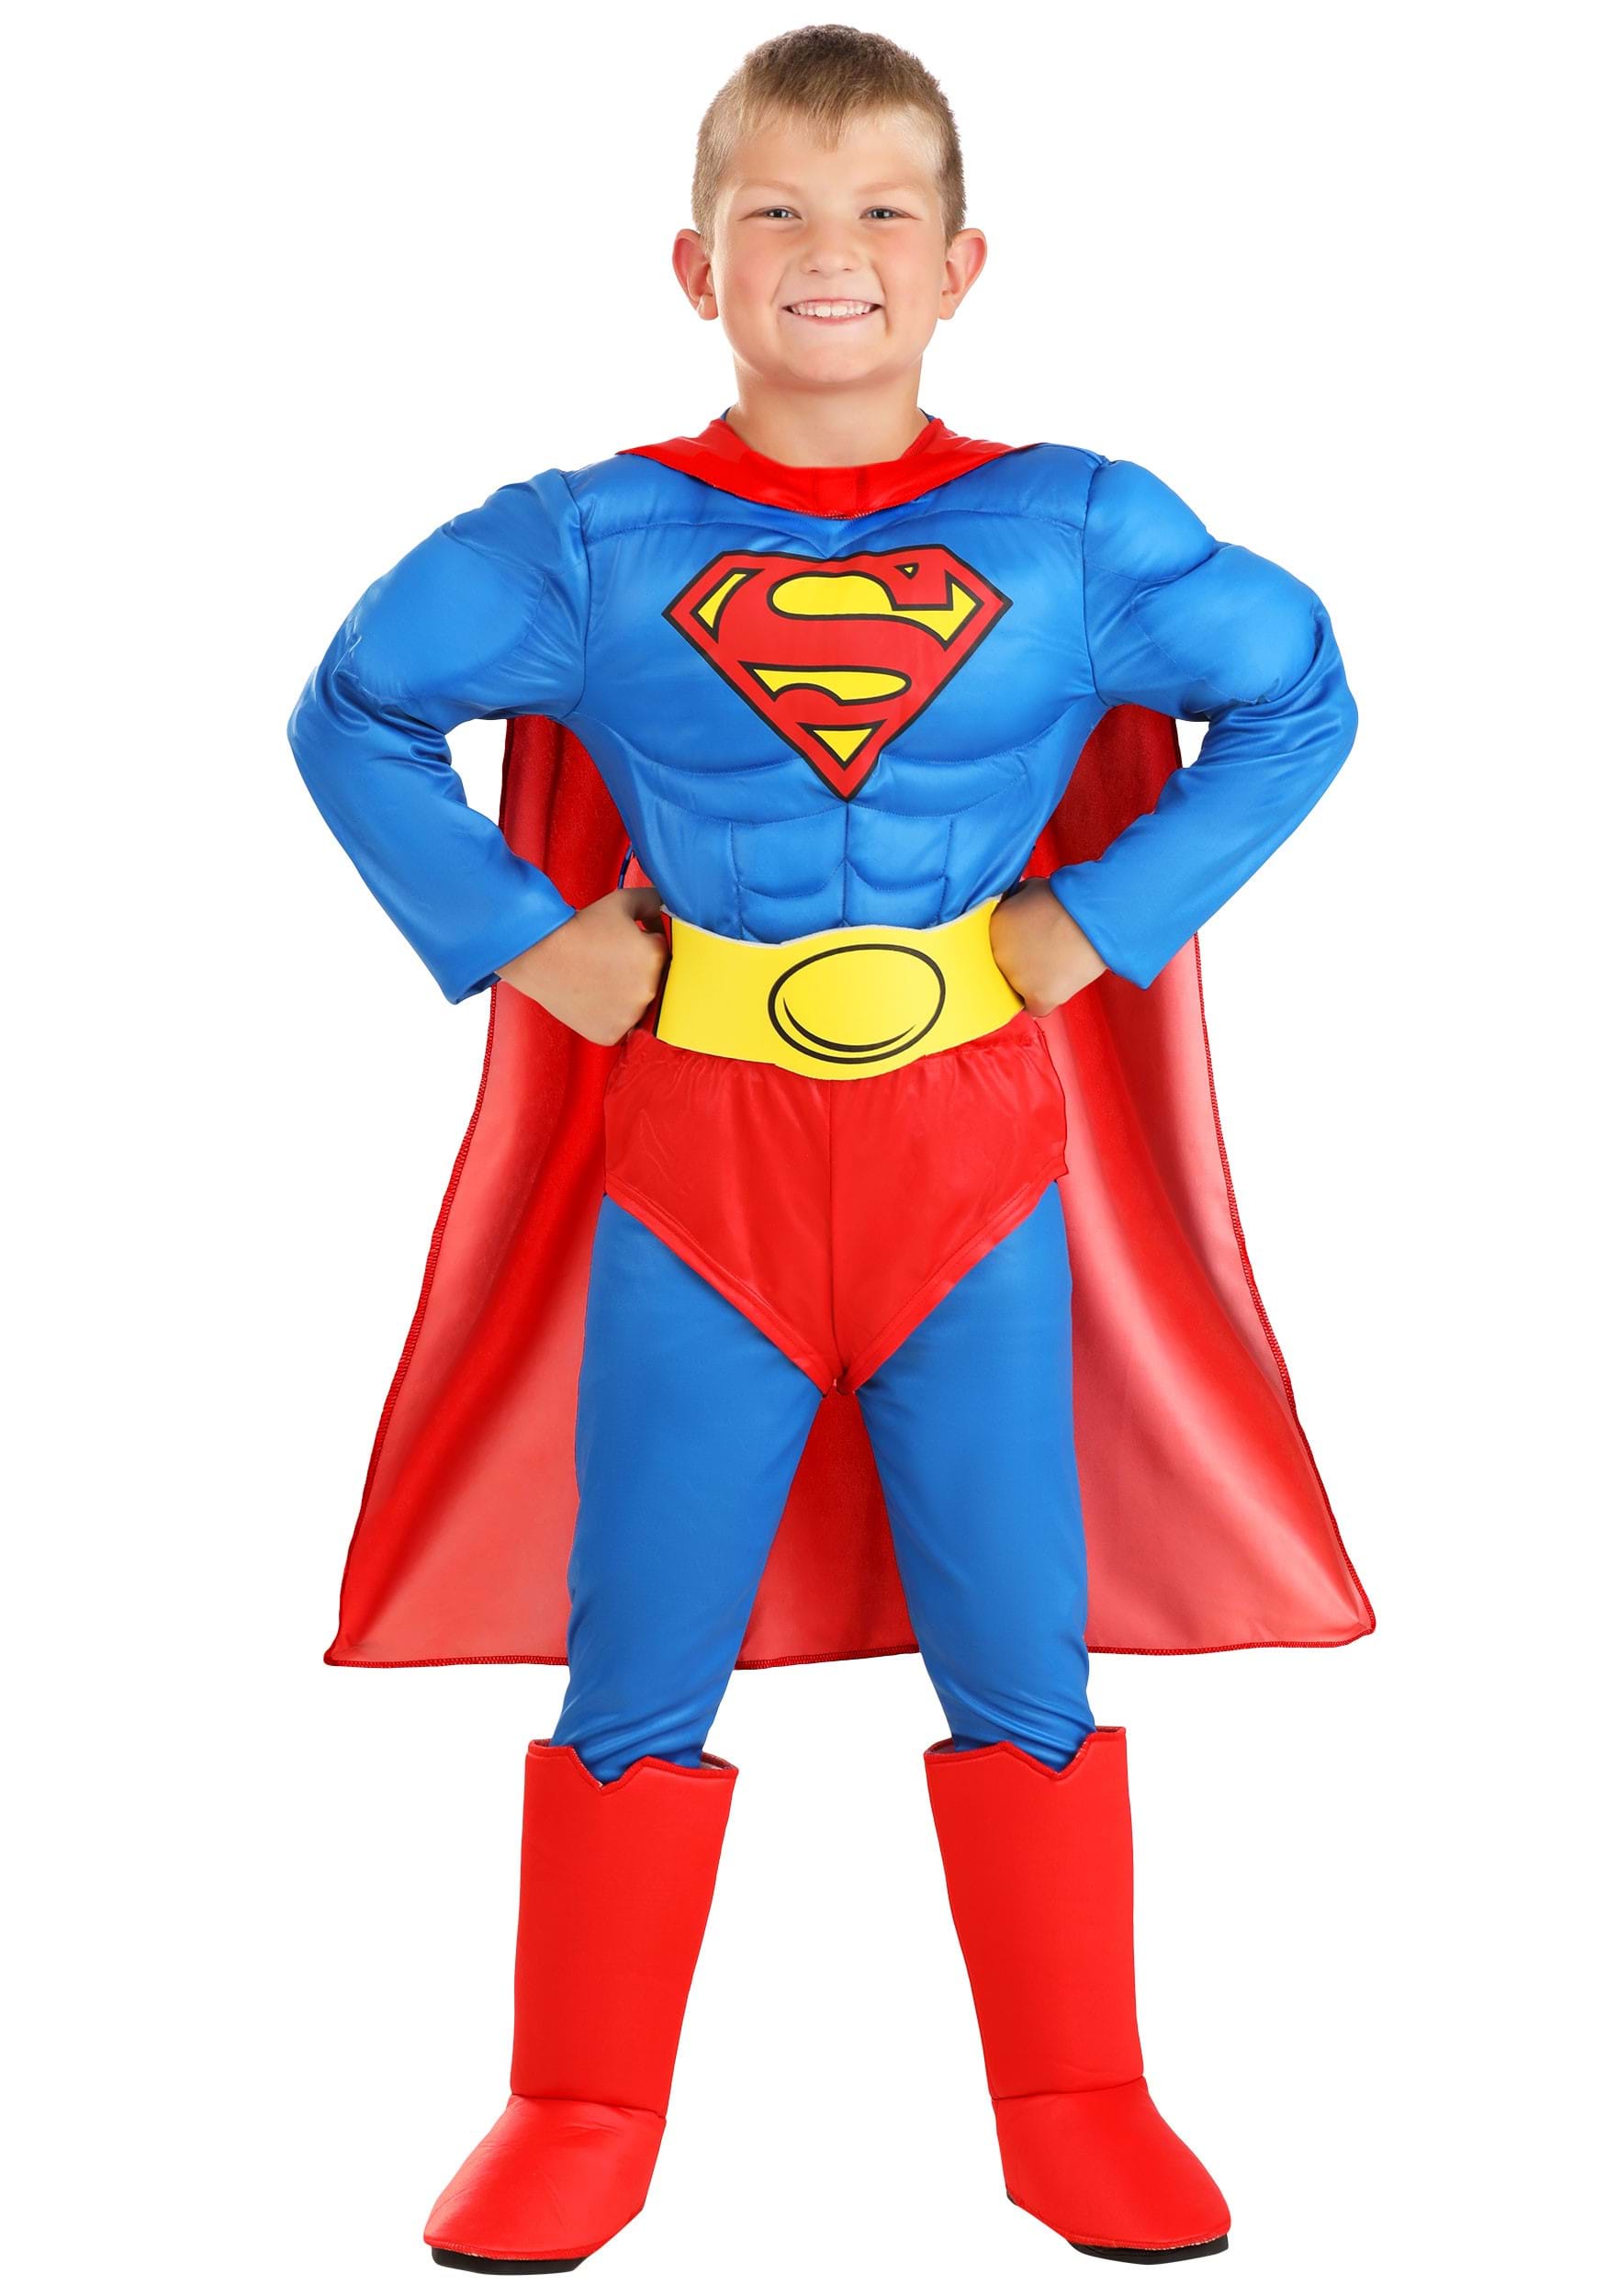 Photos - Fancy Dress Classic Jerry Leigh Kids  Superman Deluxe Costume Blue/Red/Yellow 